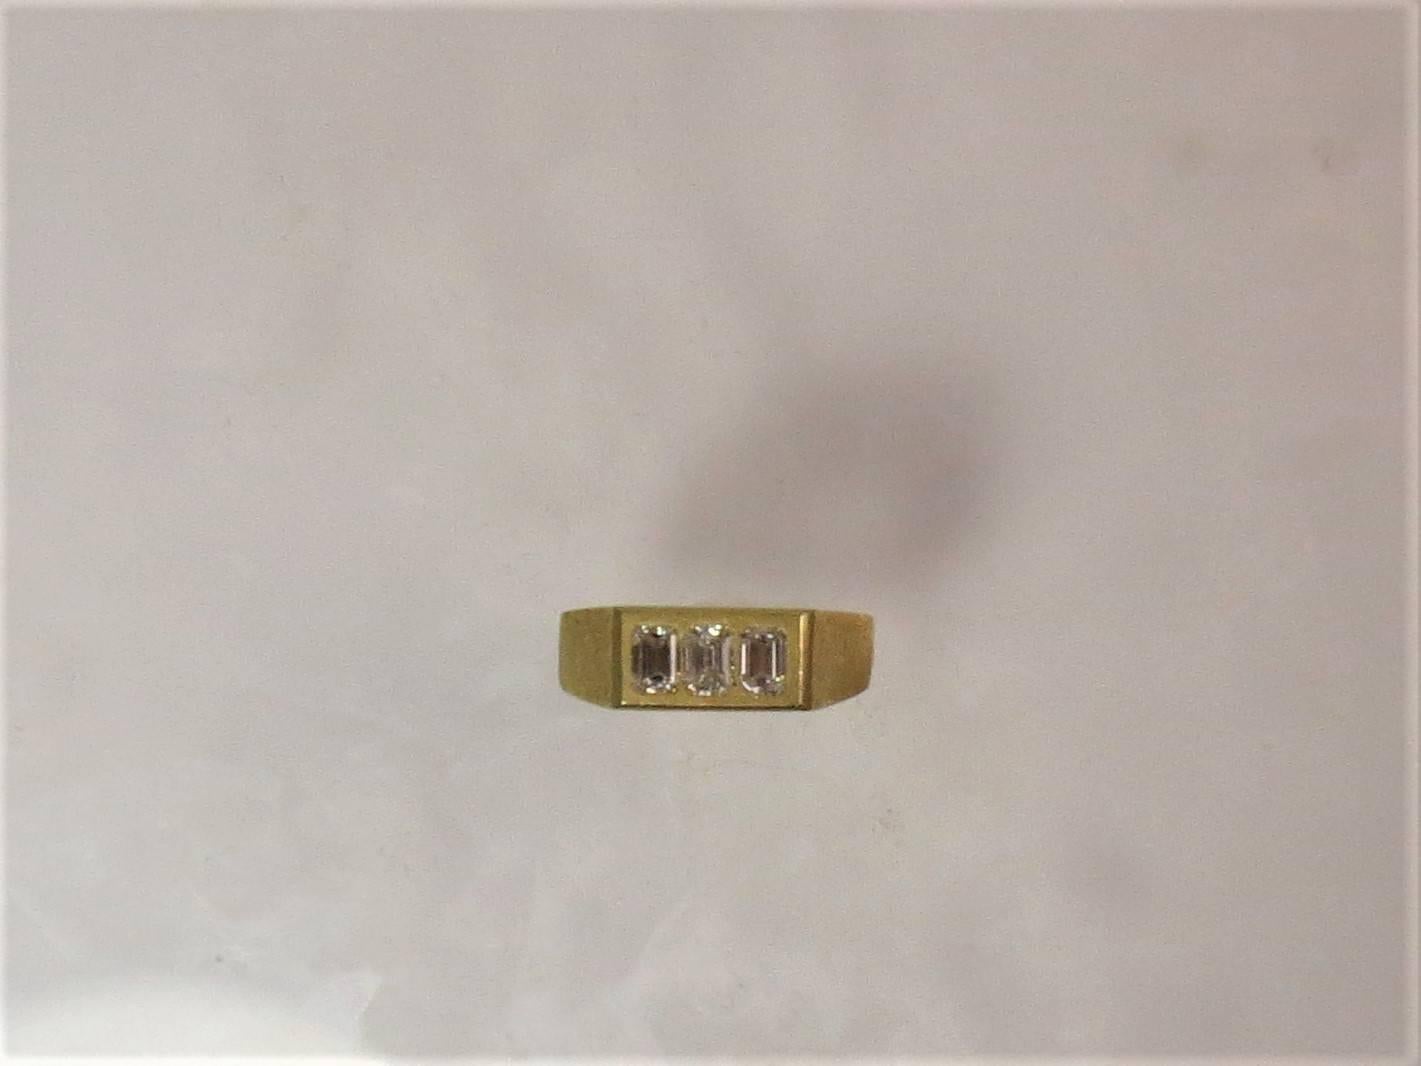 18K yellow gold gents band ring set with three emerald cut diamonds weighing .90cts, G color, VS clarity

finger size 8.5, may be sized